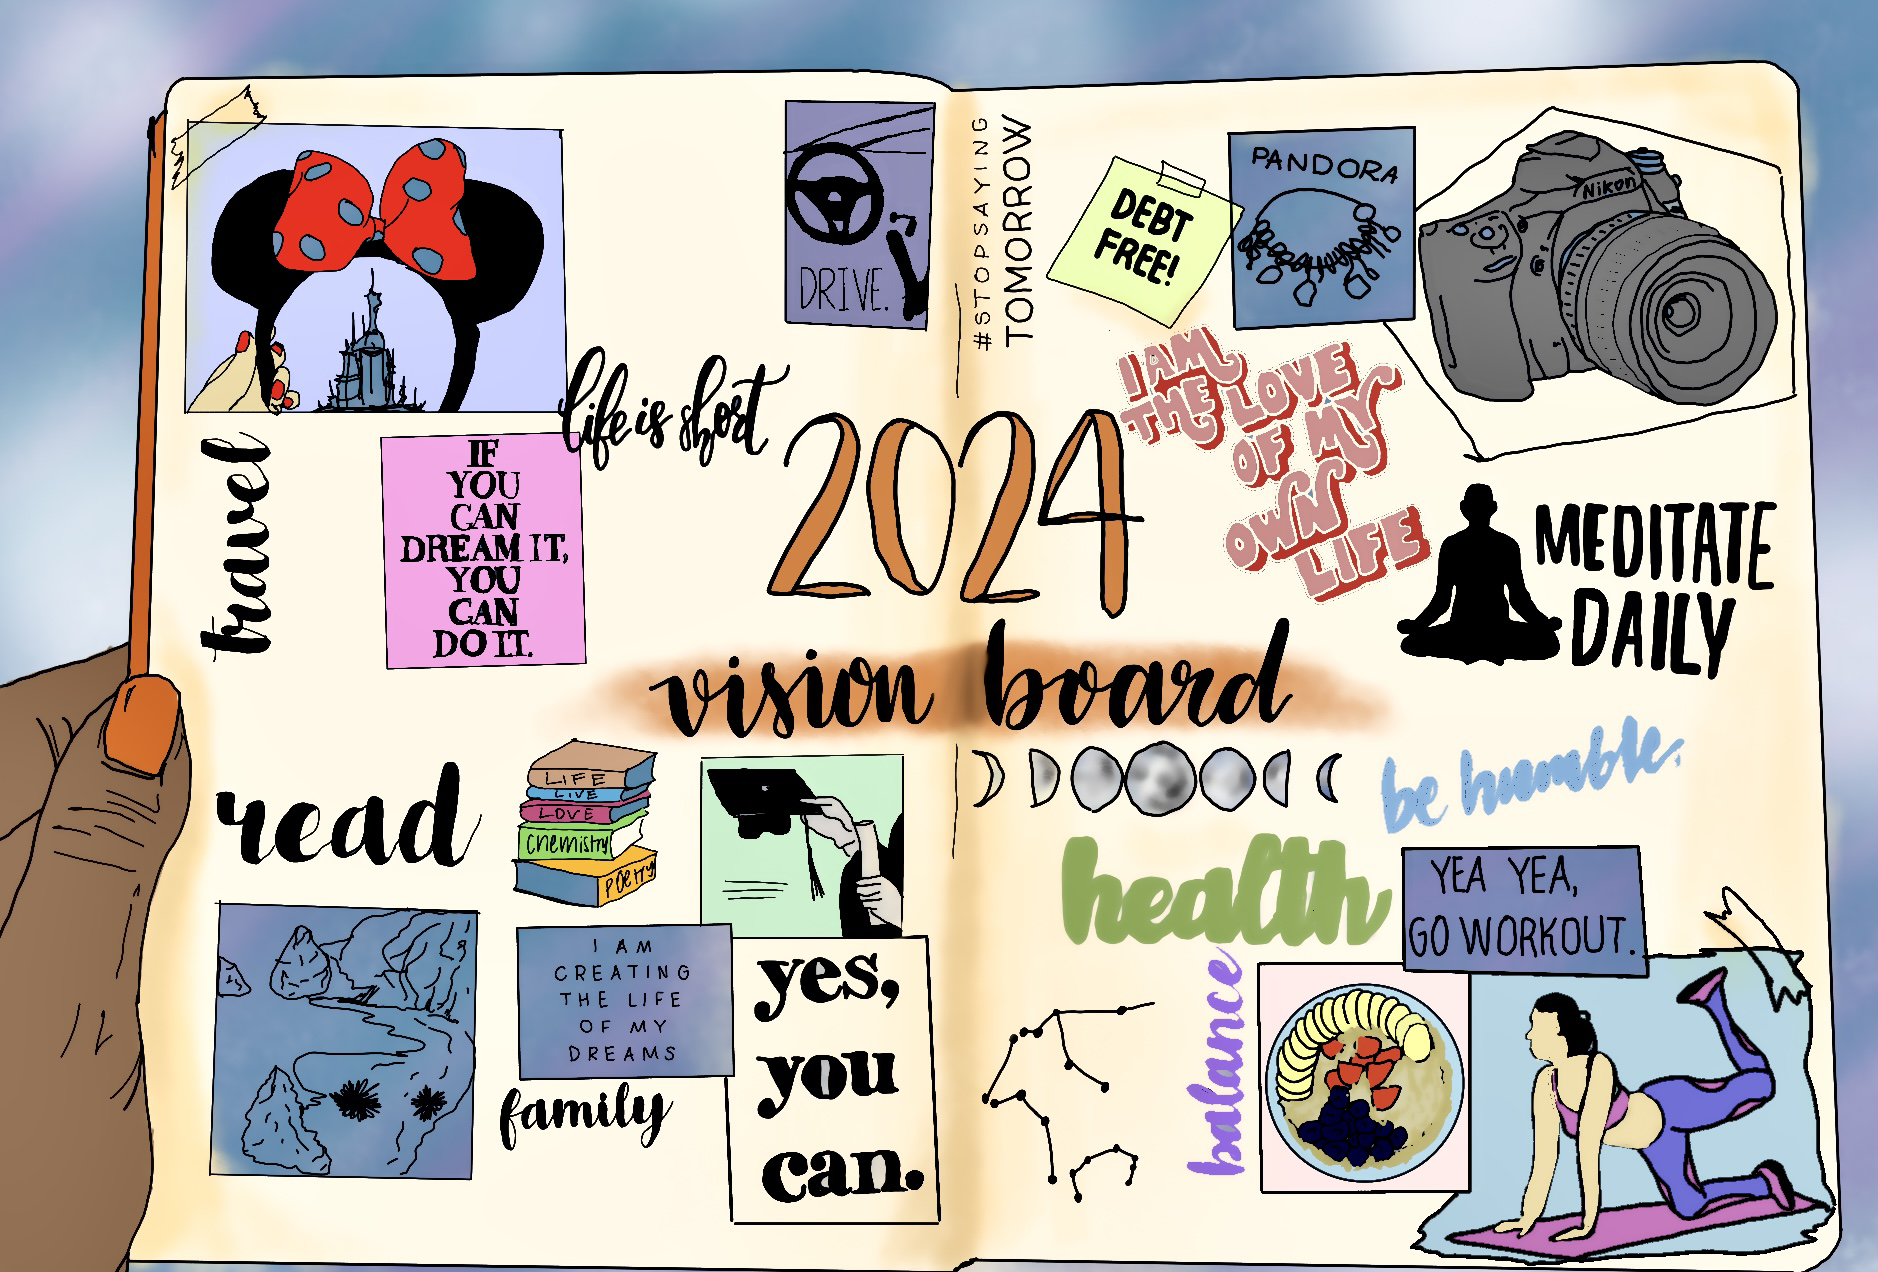 Glimpse into your future – The Daily Texan